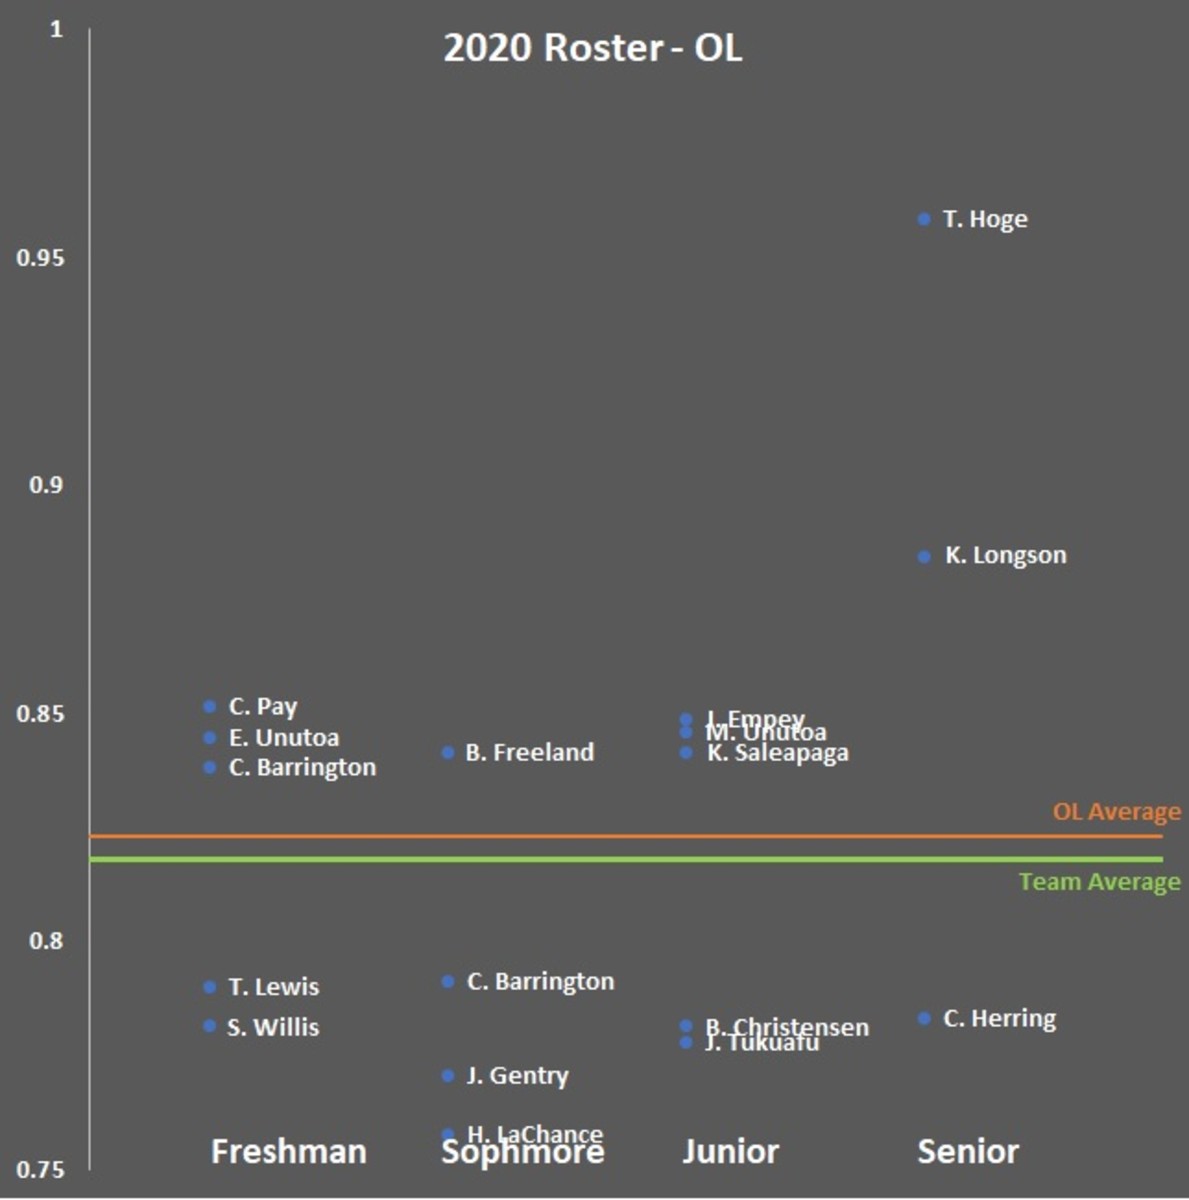 byu-football-2020-roster-offensive-line-rankings